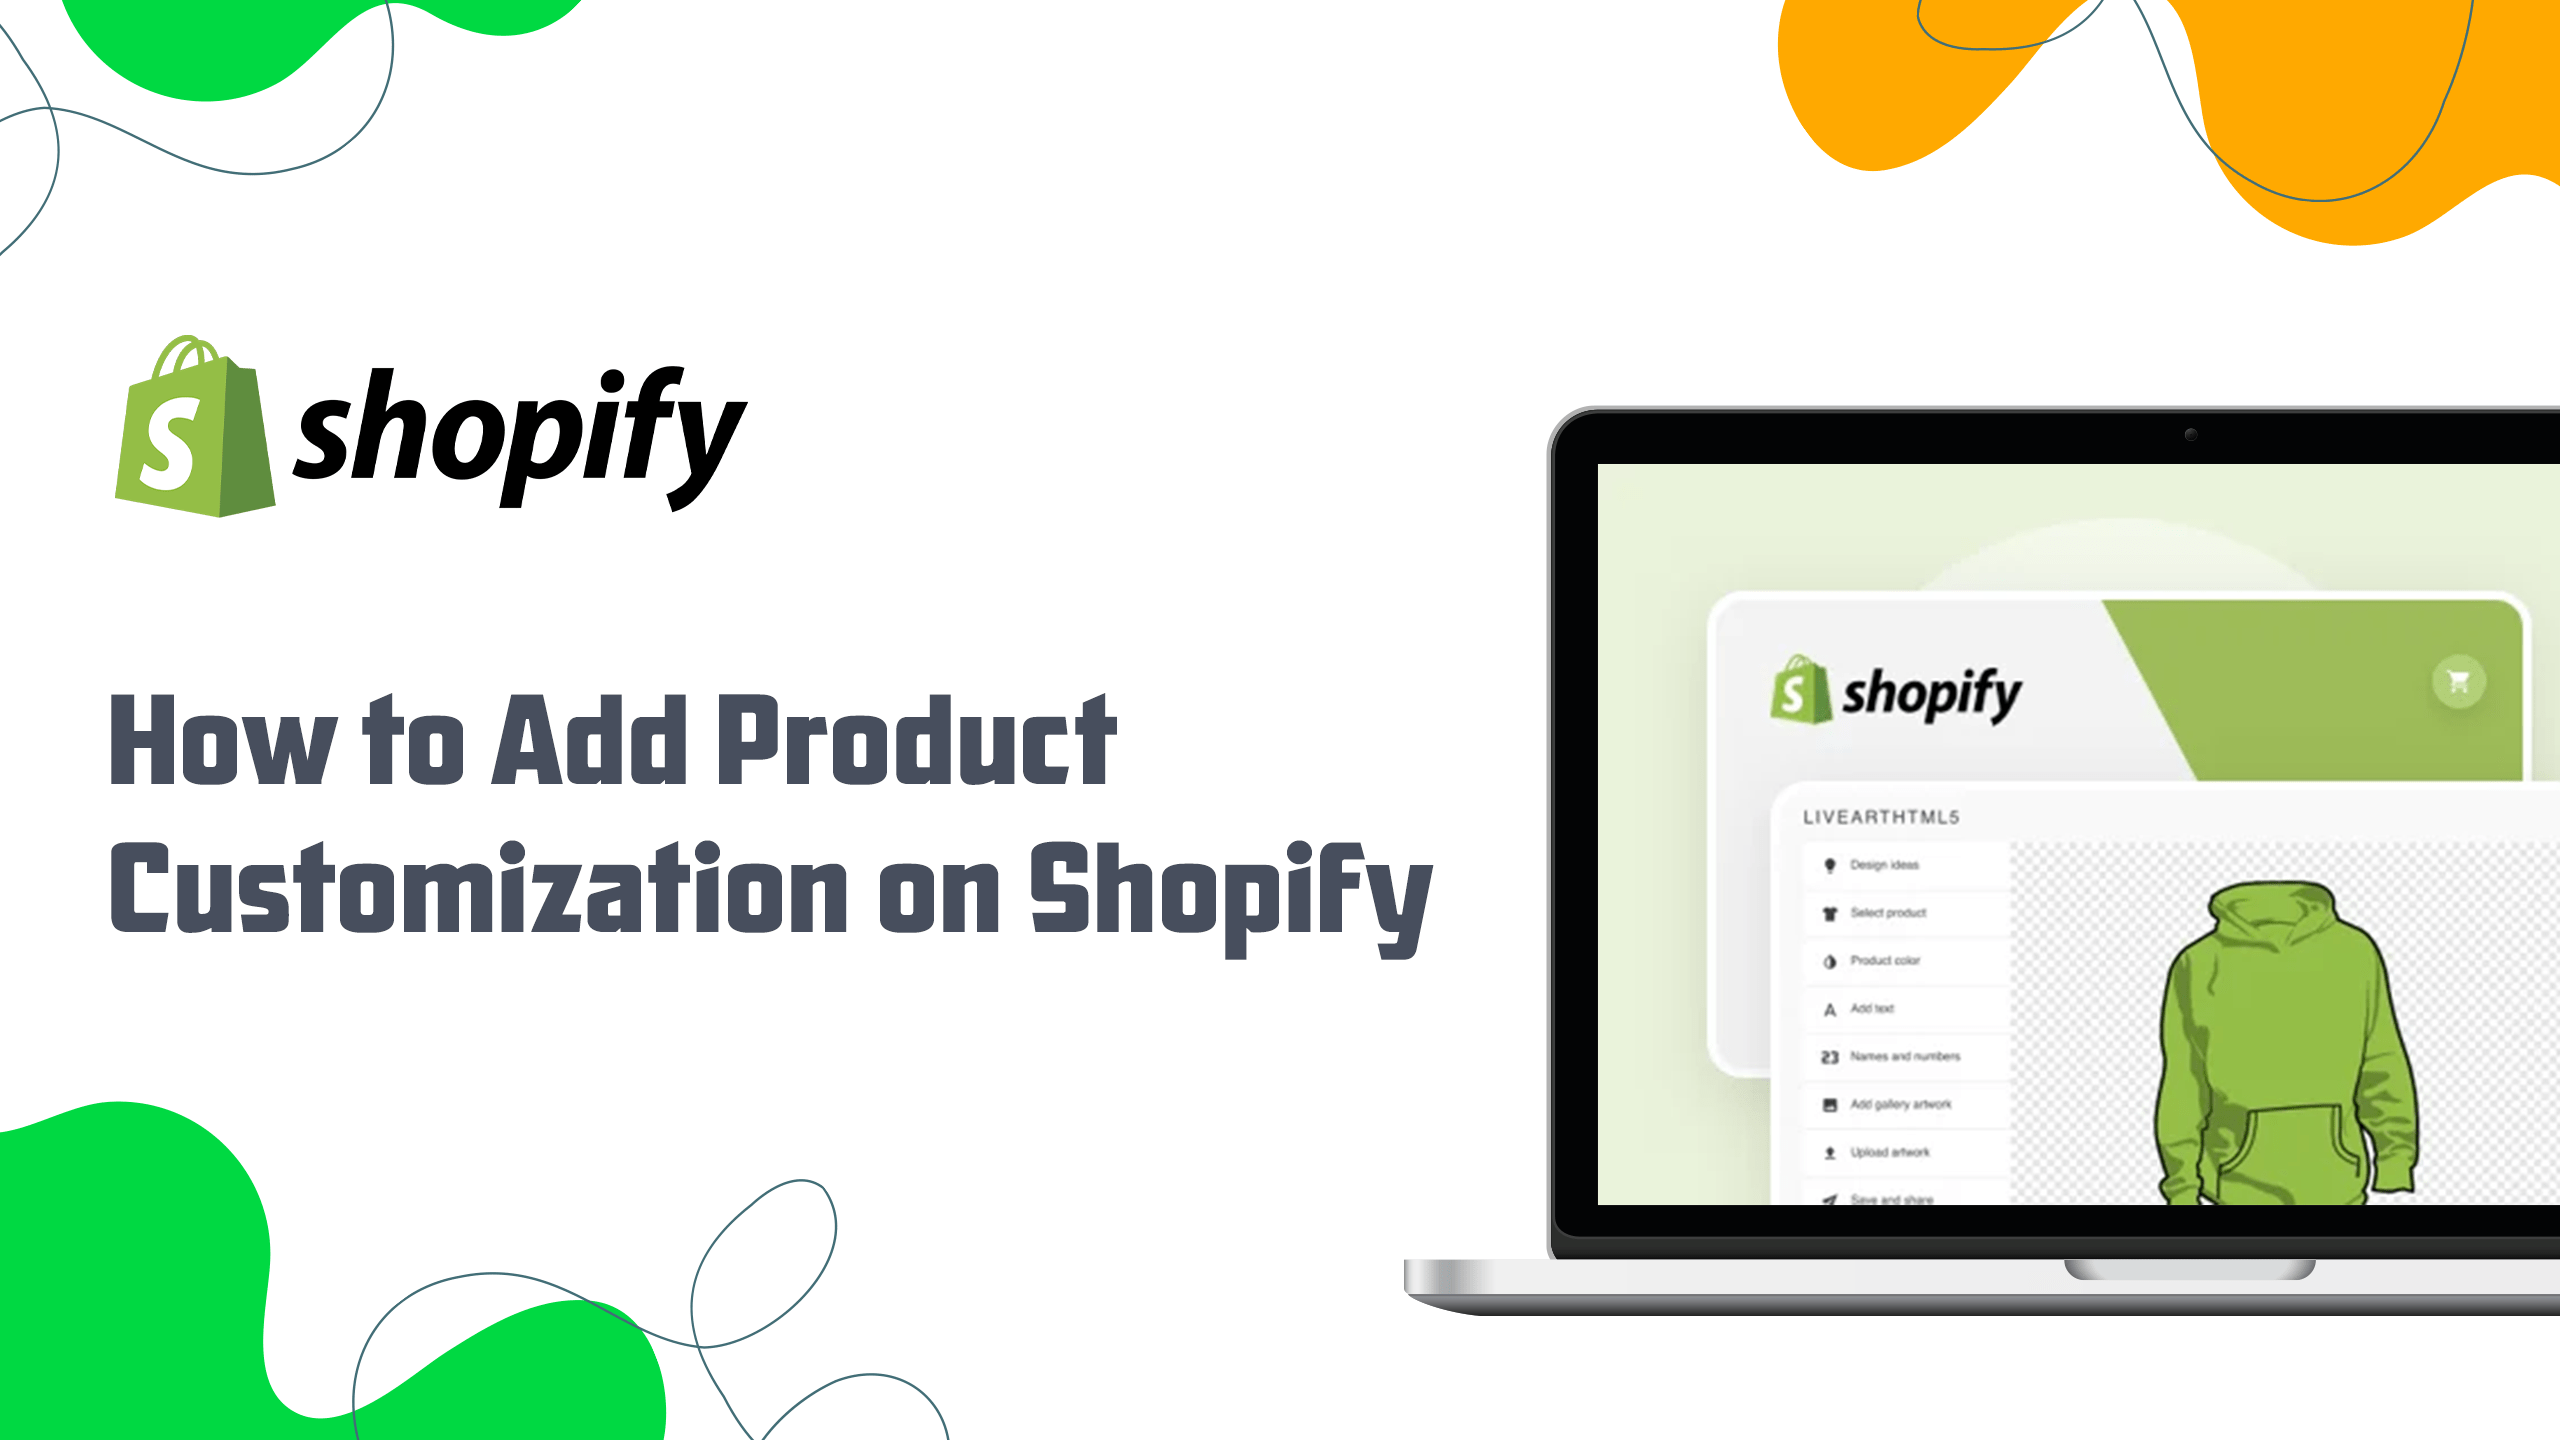 How to Add Product Customization on Shopify